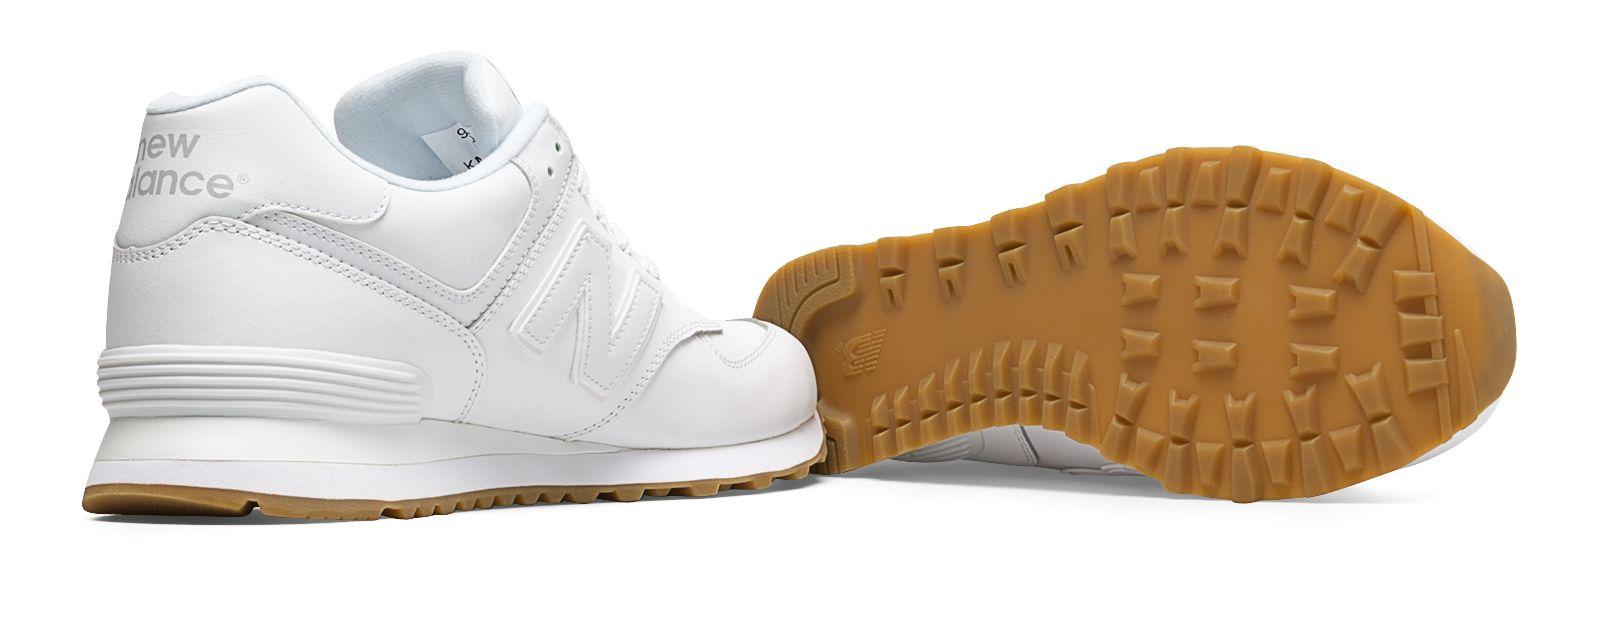 New Balance 574 Leather in White for Men - Lyst